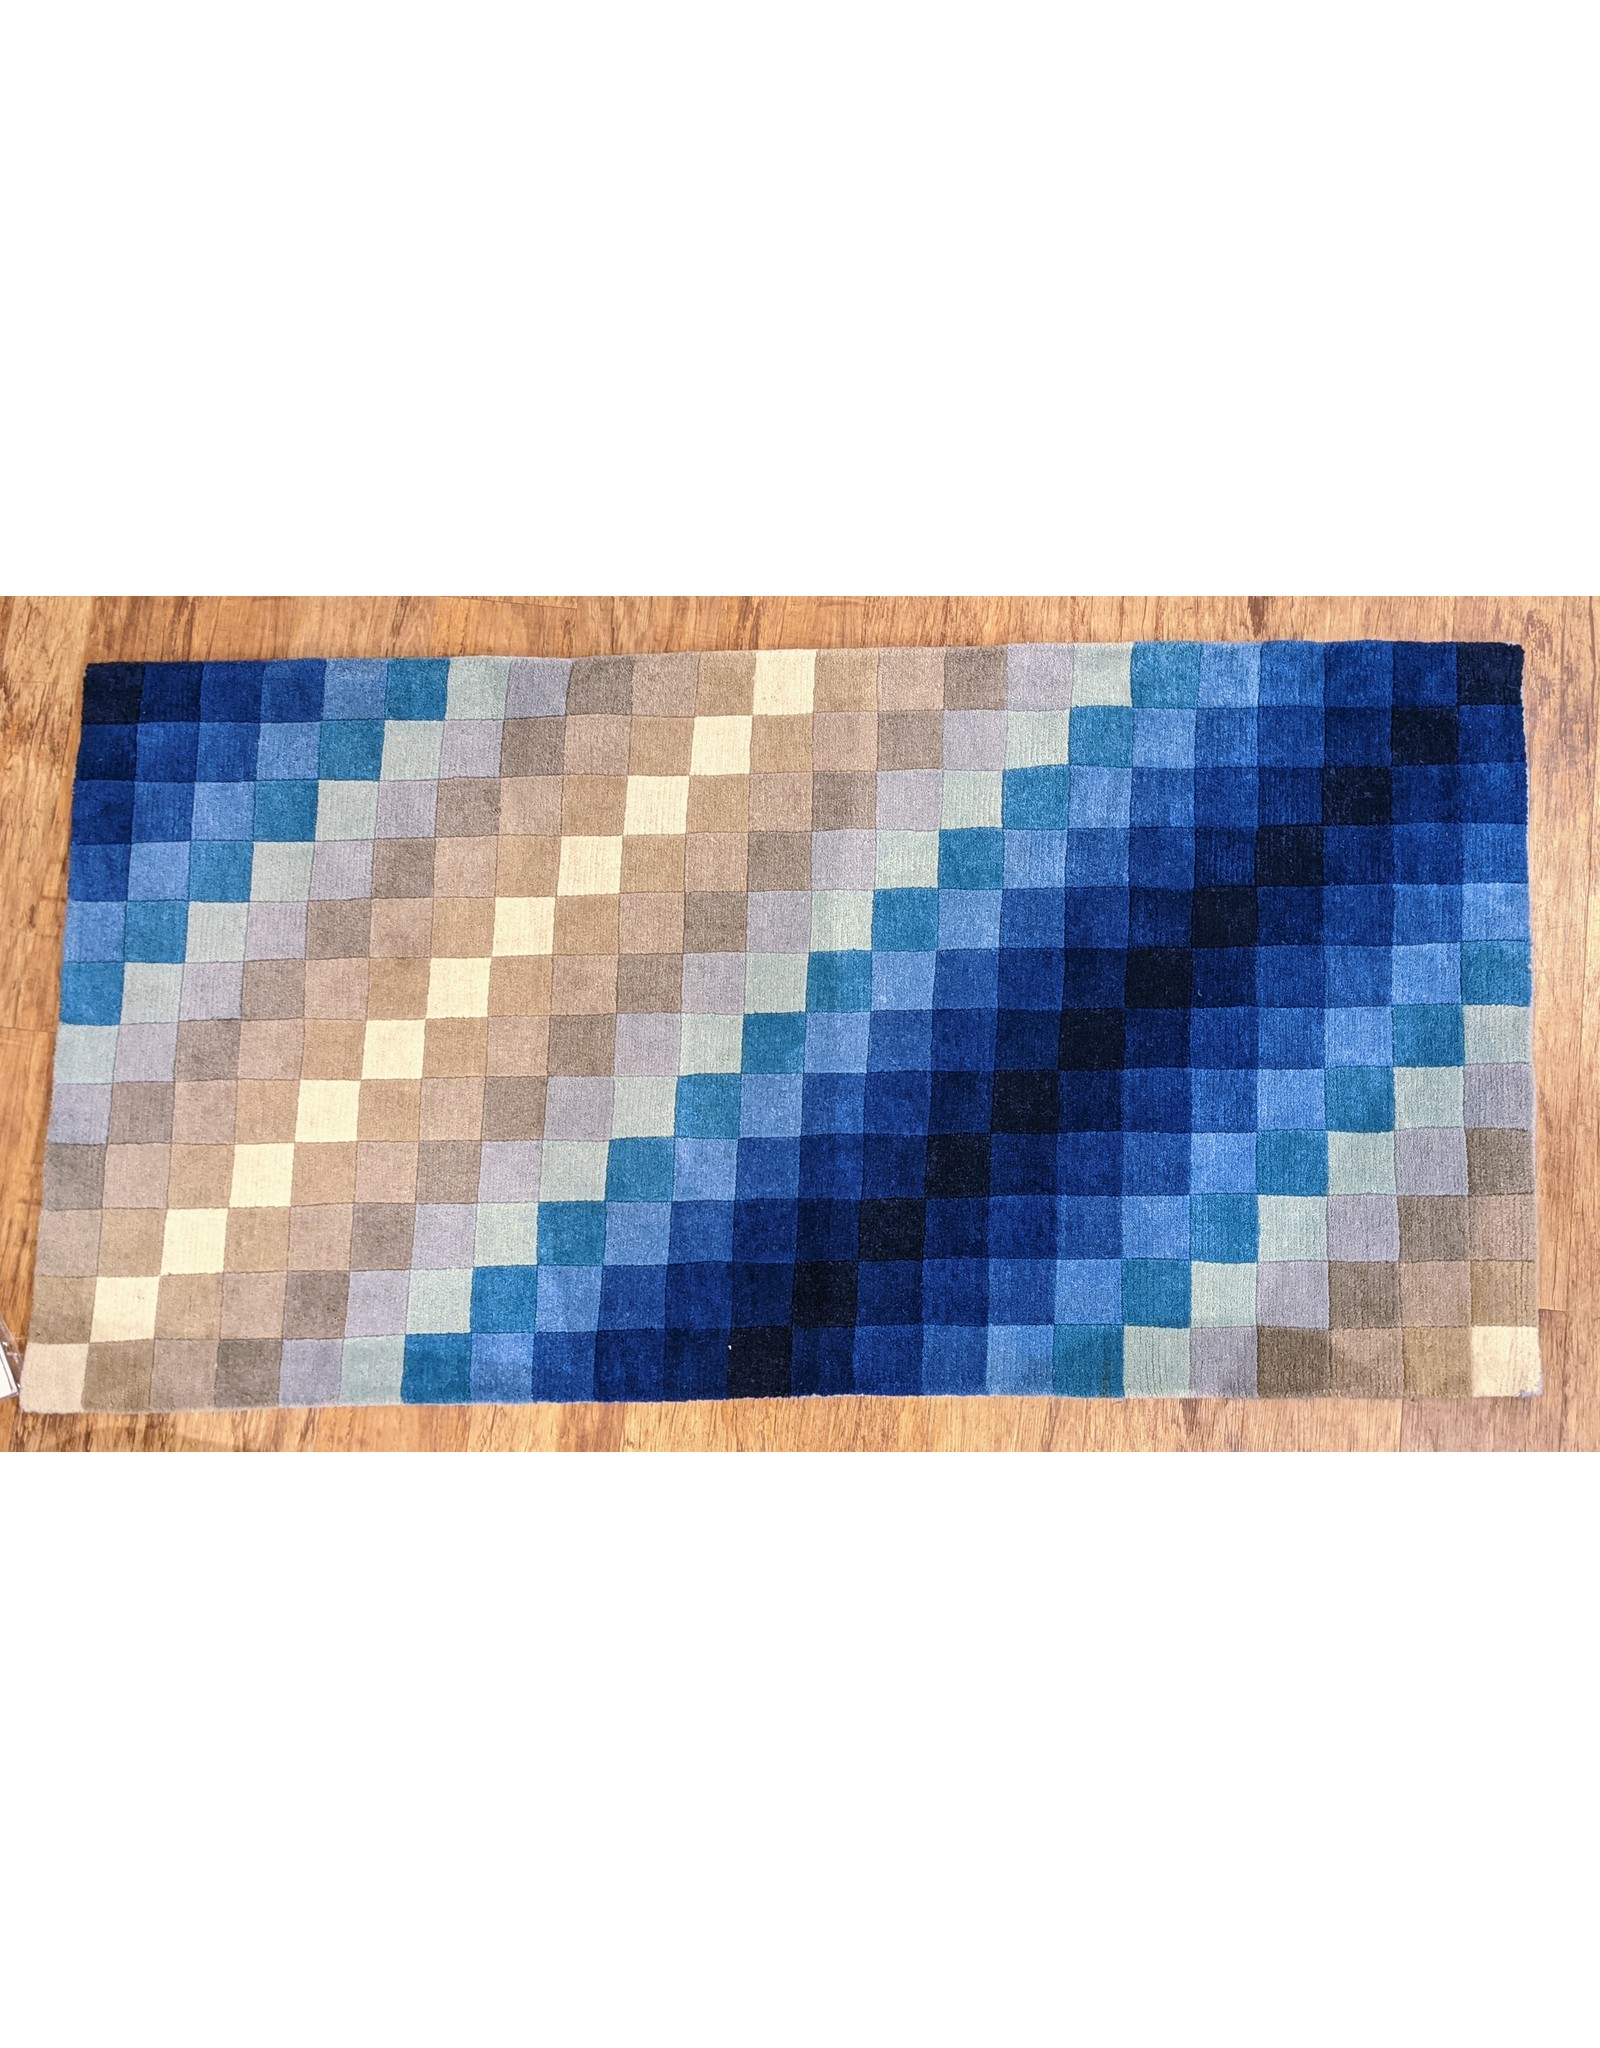 Ten Thousand Villages Shades of Blue Accent Rug